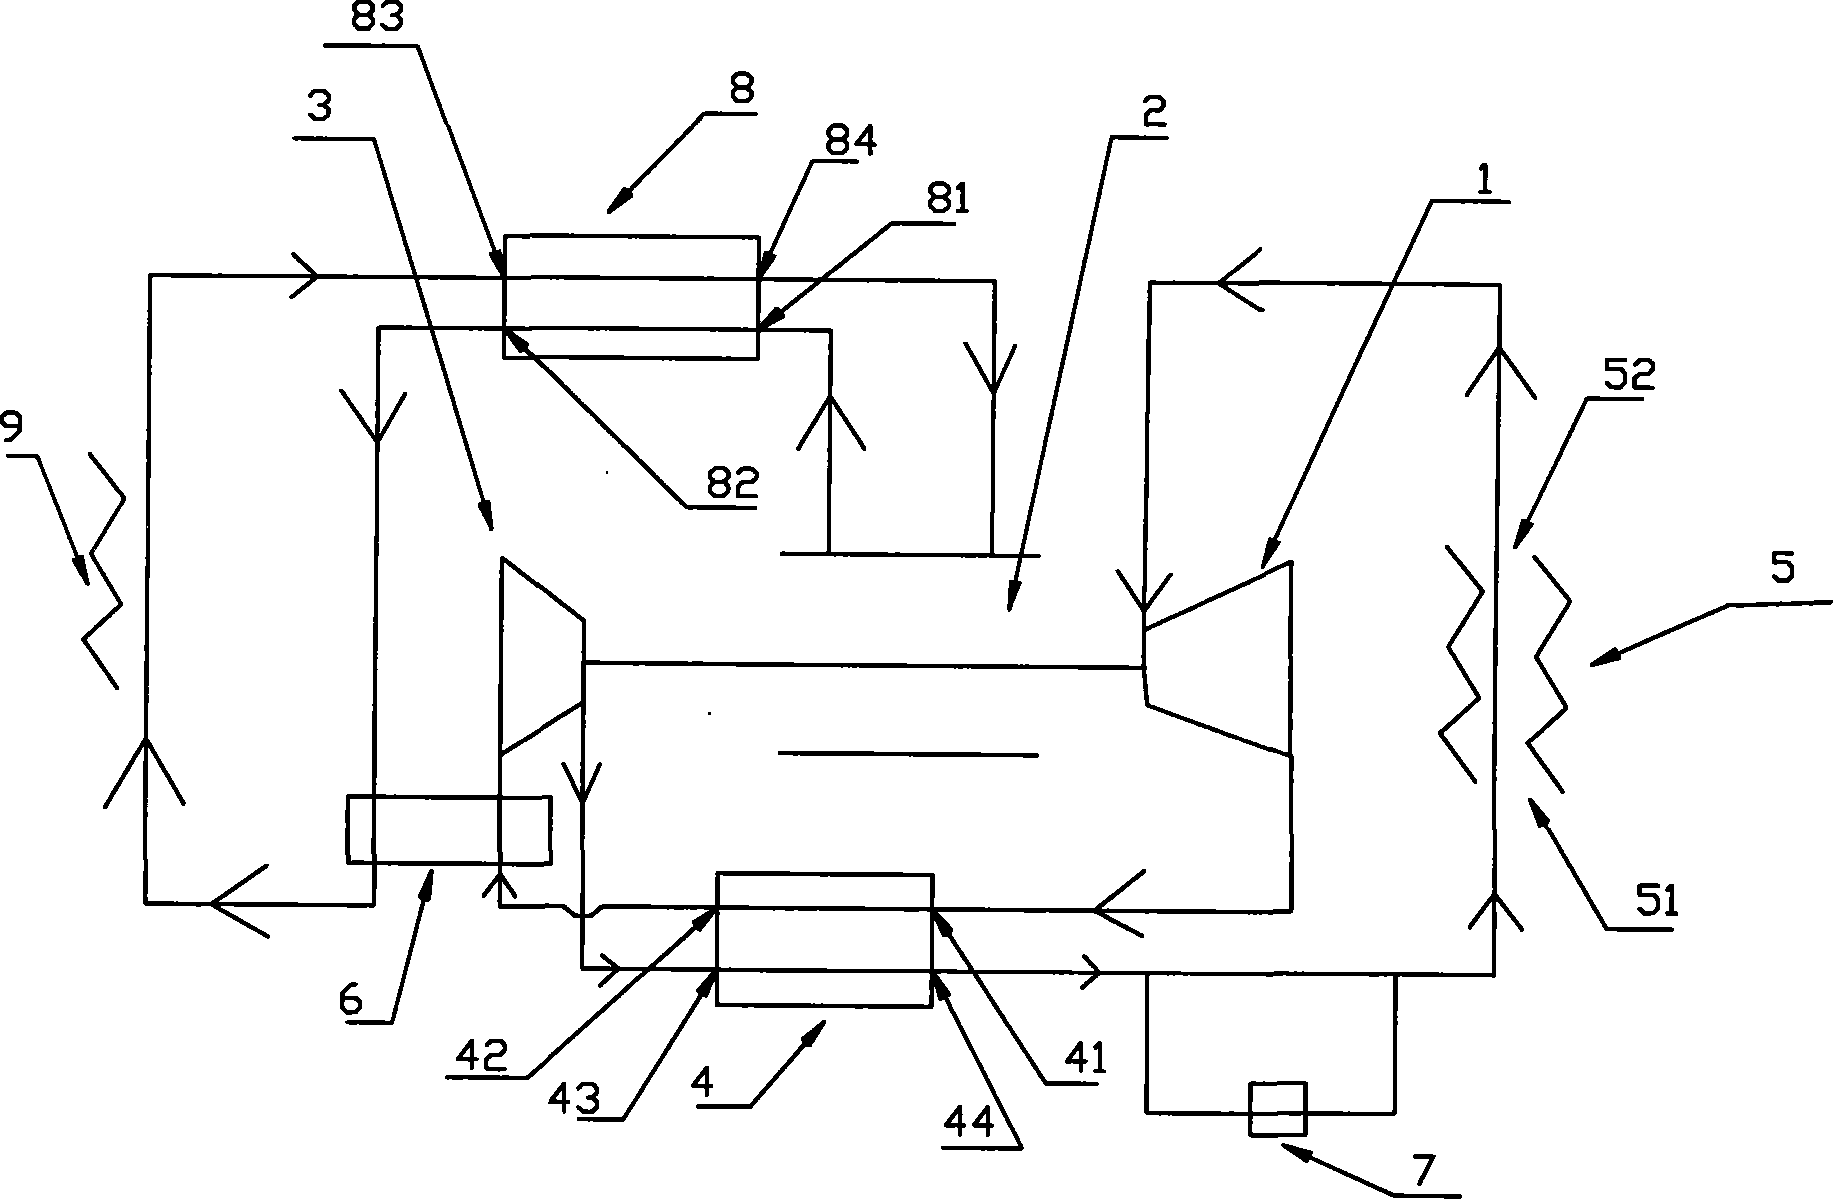 Closed brayton cycle excess heat generating system and method for using same for excess heat power generation